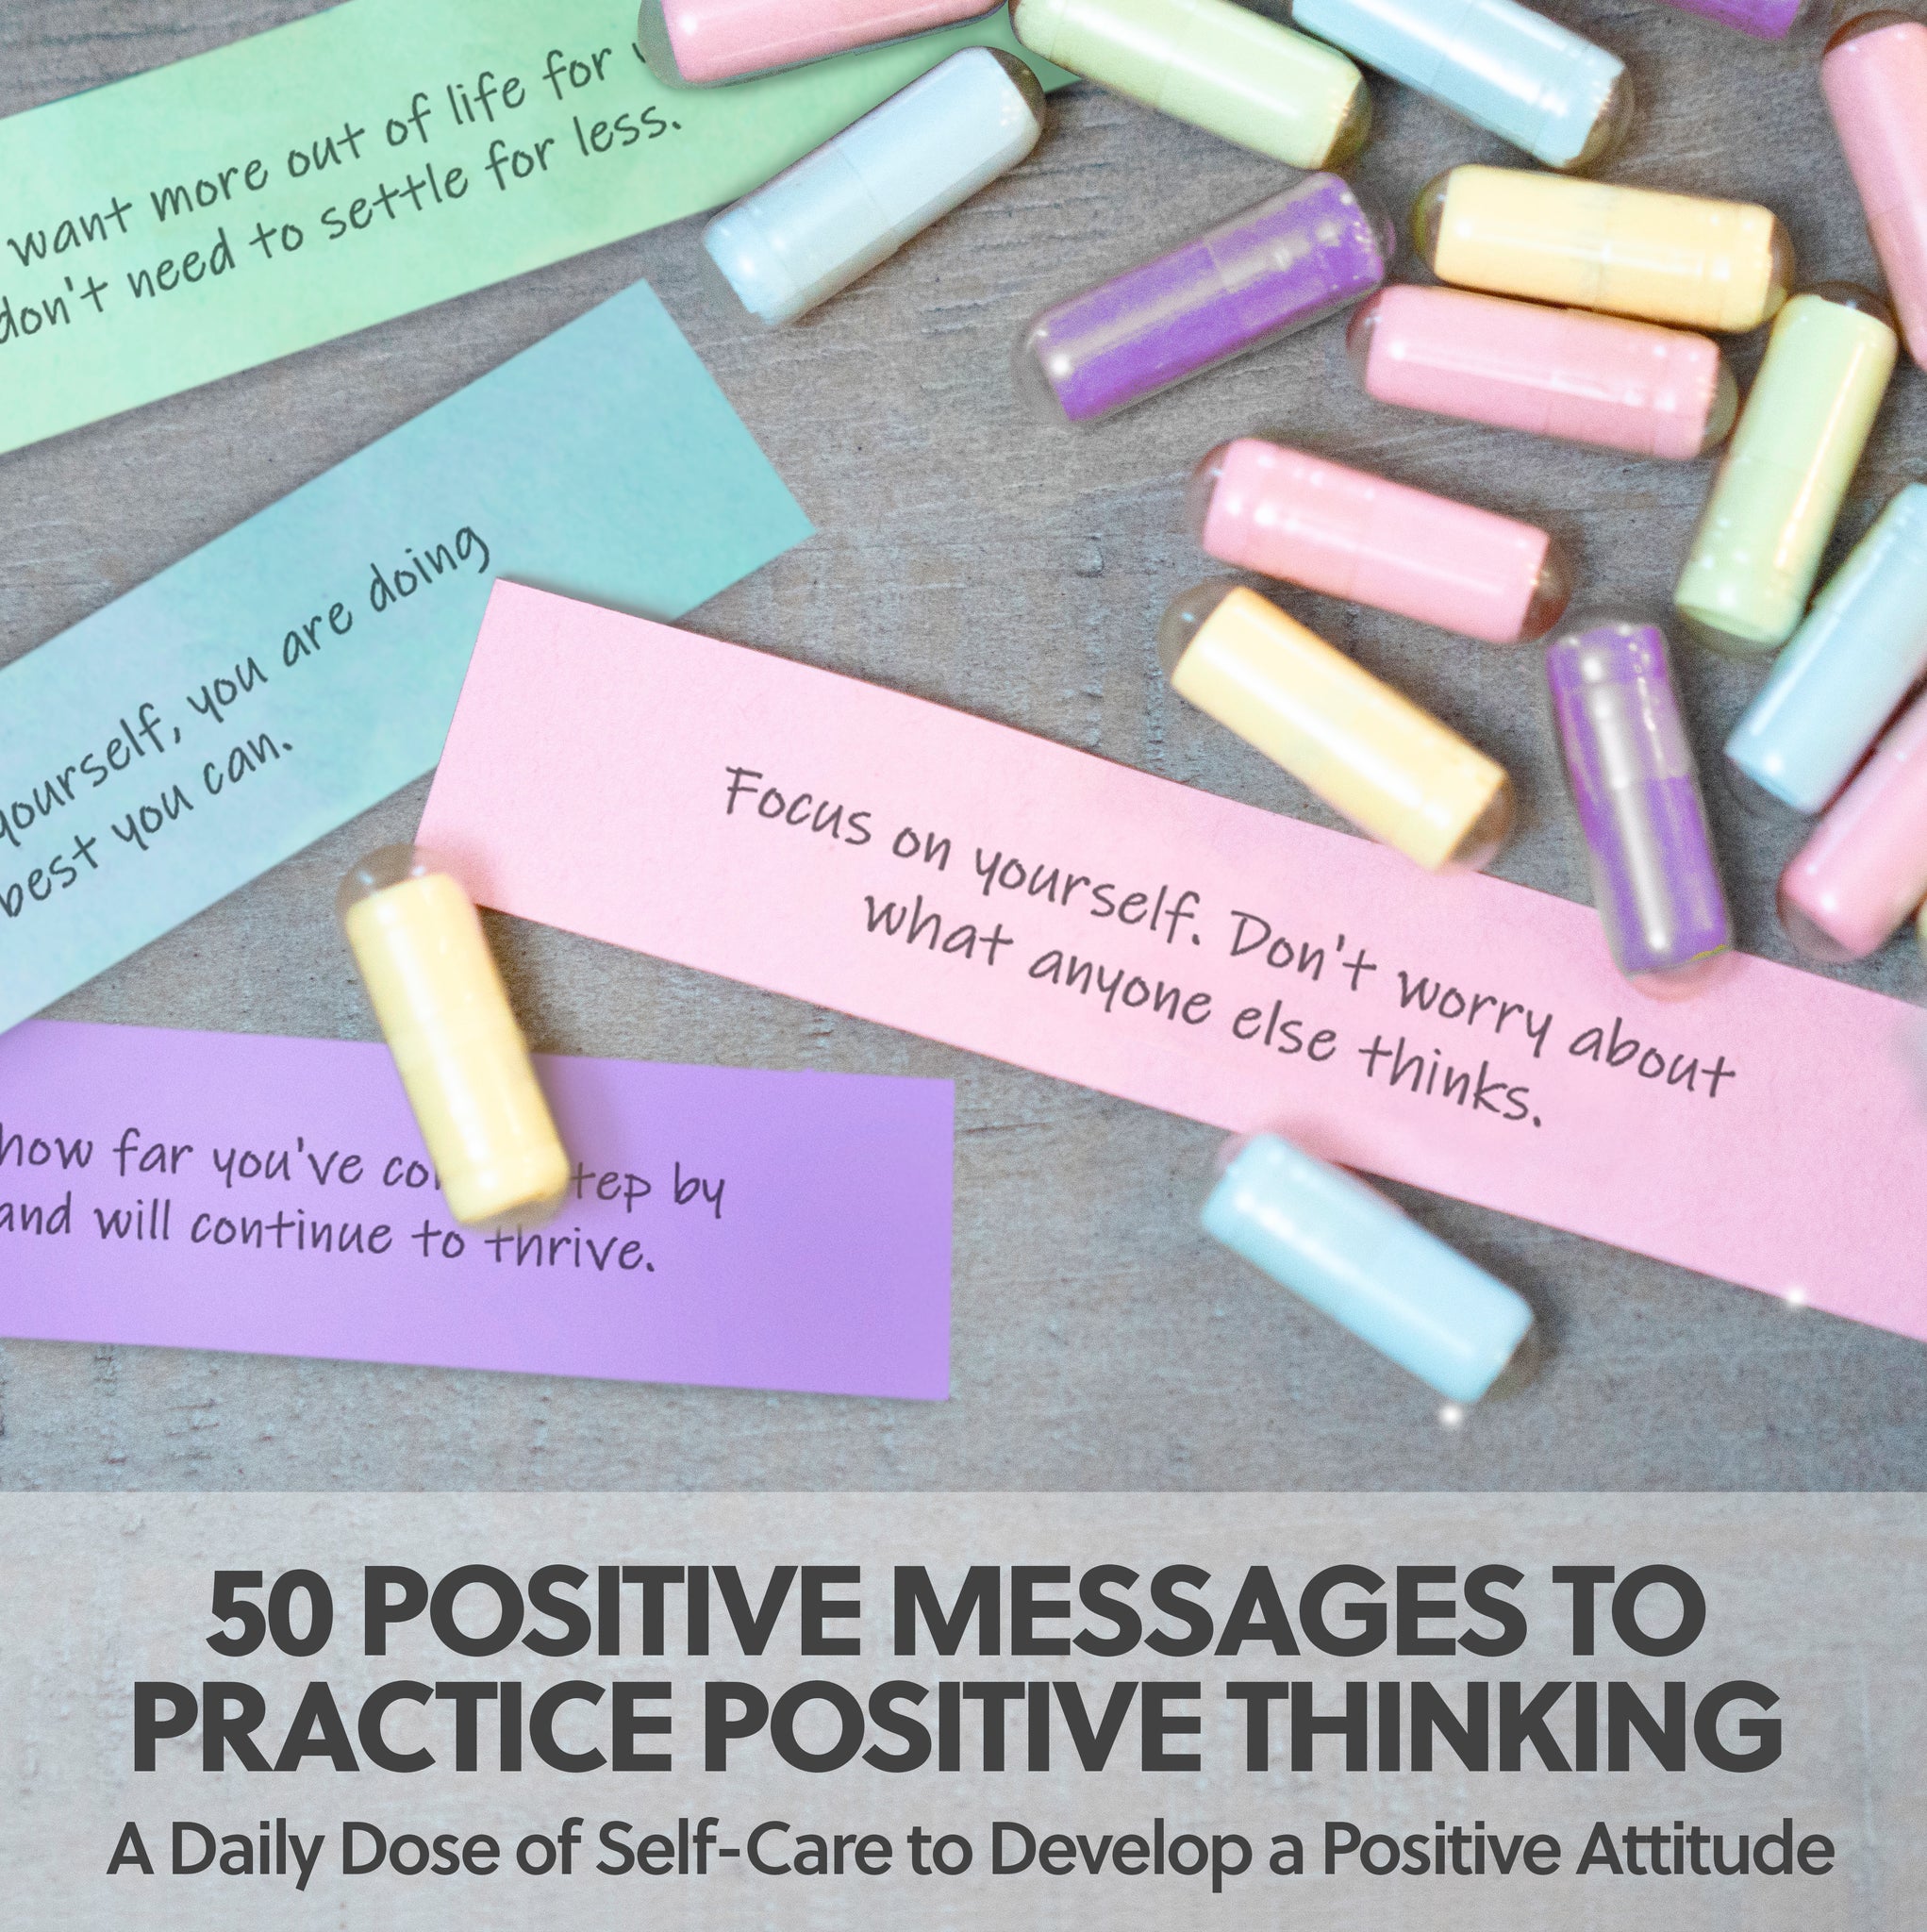 Self-Care Gifts  Positive Messages on a Pill Capsule – messagepillco